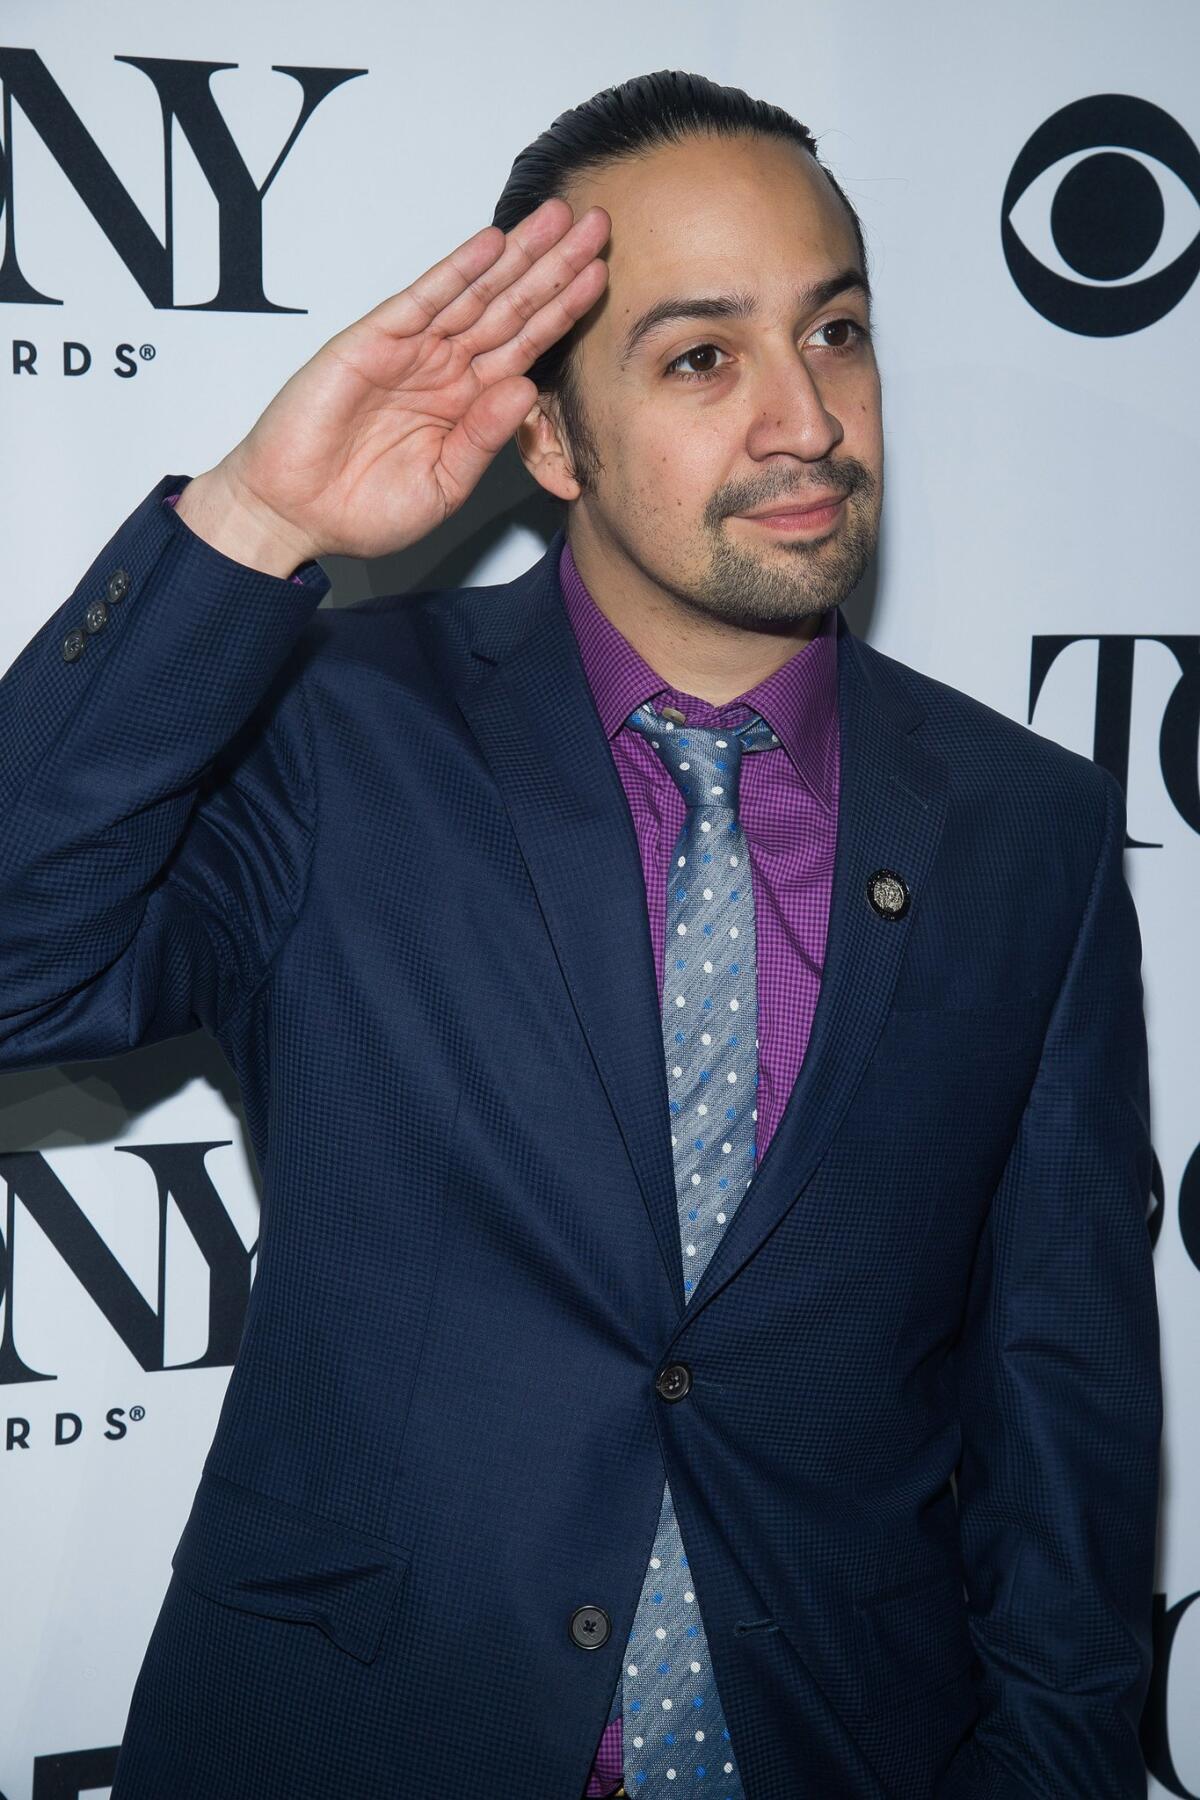 Lin-Manuel Miranda attends the 2016 Tony Awards "Meet the Nominees" press junket at the Paramount Hotel on Wednesday, May 4, 2016, in New York. Miranda is nominated for several awards including, best original score, best book of a musical and best performance by an actor in a leading role in a musical for, "Hamilton." (Photo by Charles Sykes/Invision/AP) The Associated Press